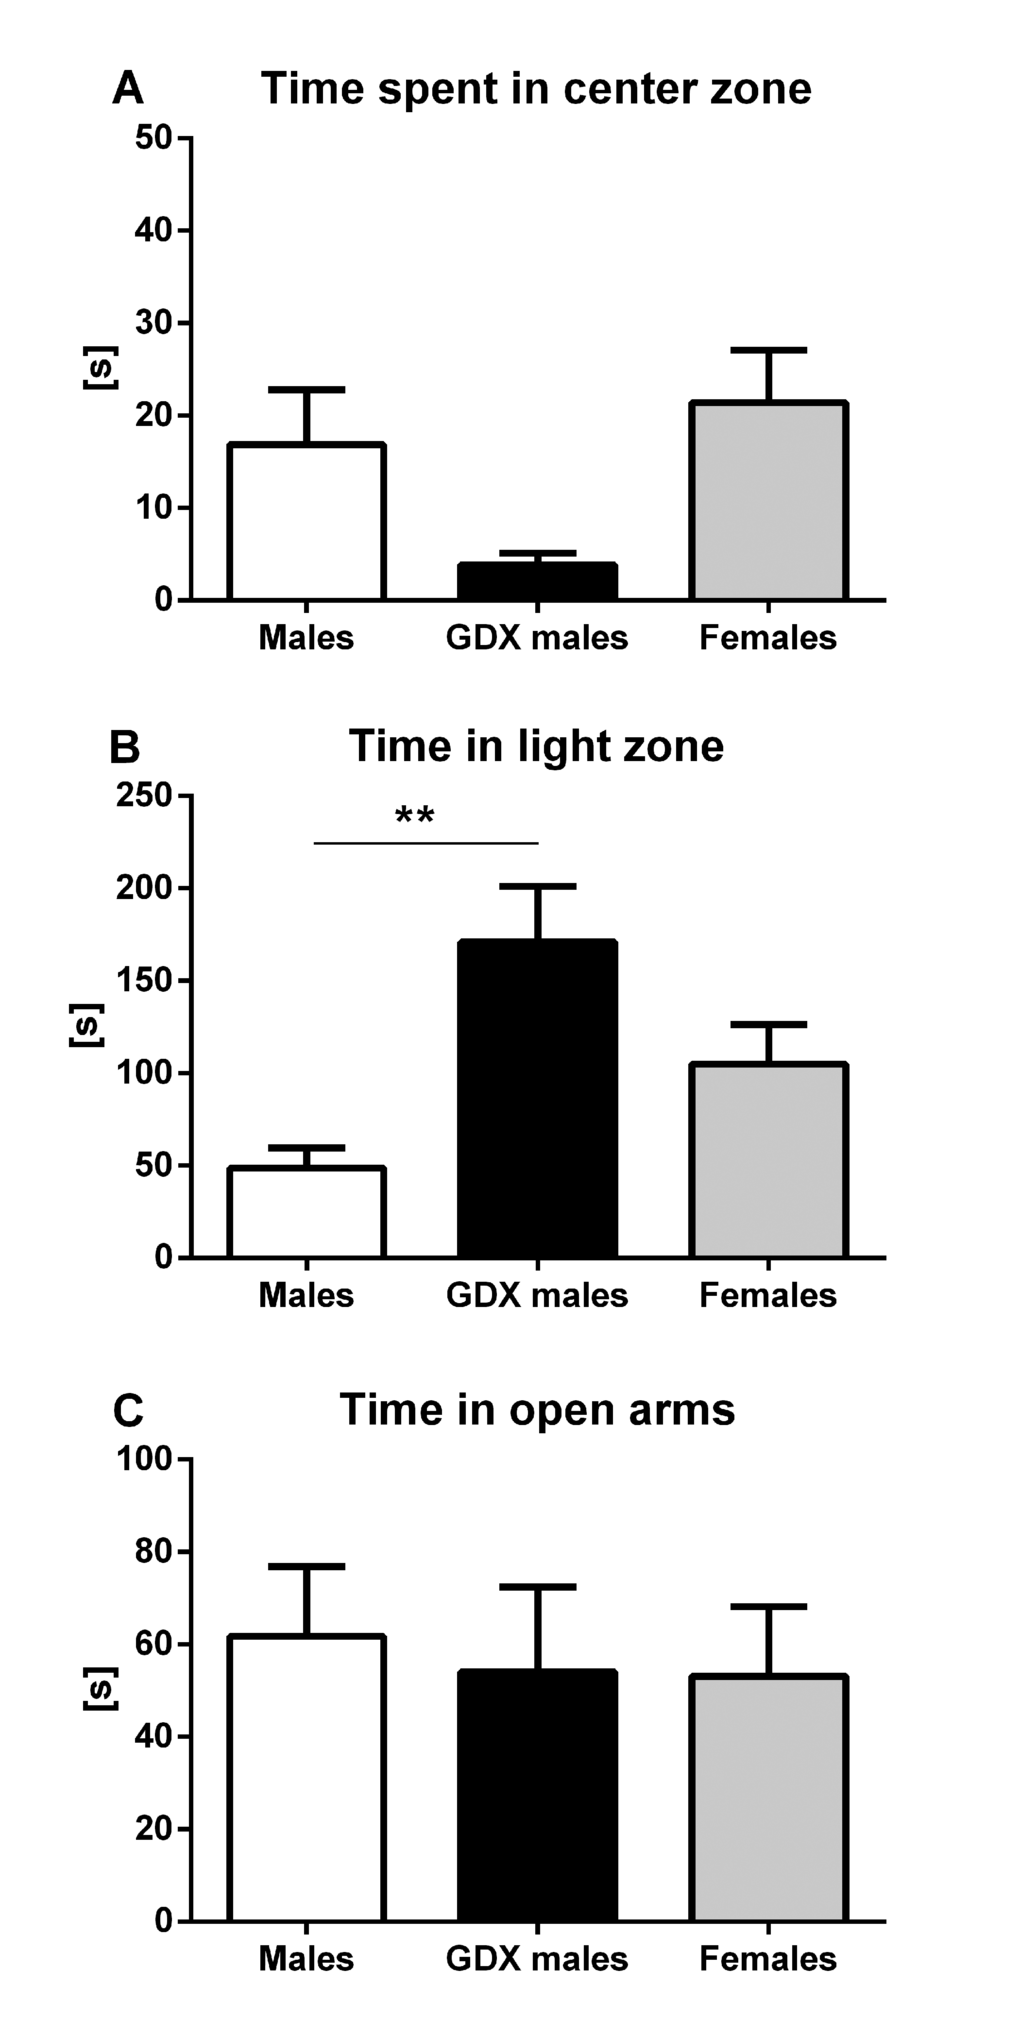 Anxiety-like behavior in aged rats. (A) Time spent in the center zone of the open field, (B) time spent in the light zone of the light/dark box and (C) time spent in the open arms of the elevated plus maze. No significant difference between the groups was found in the time spent in the center zone. GDX males were less anxious than males in light/dark box (p